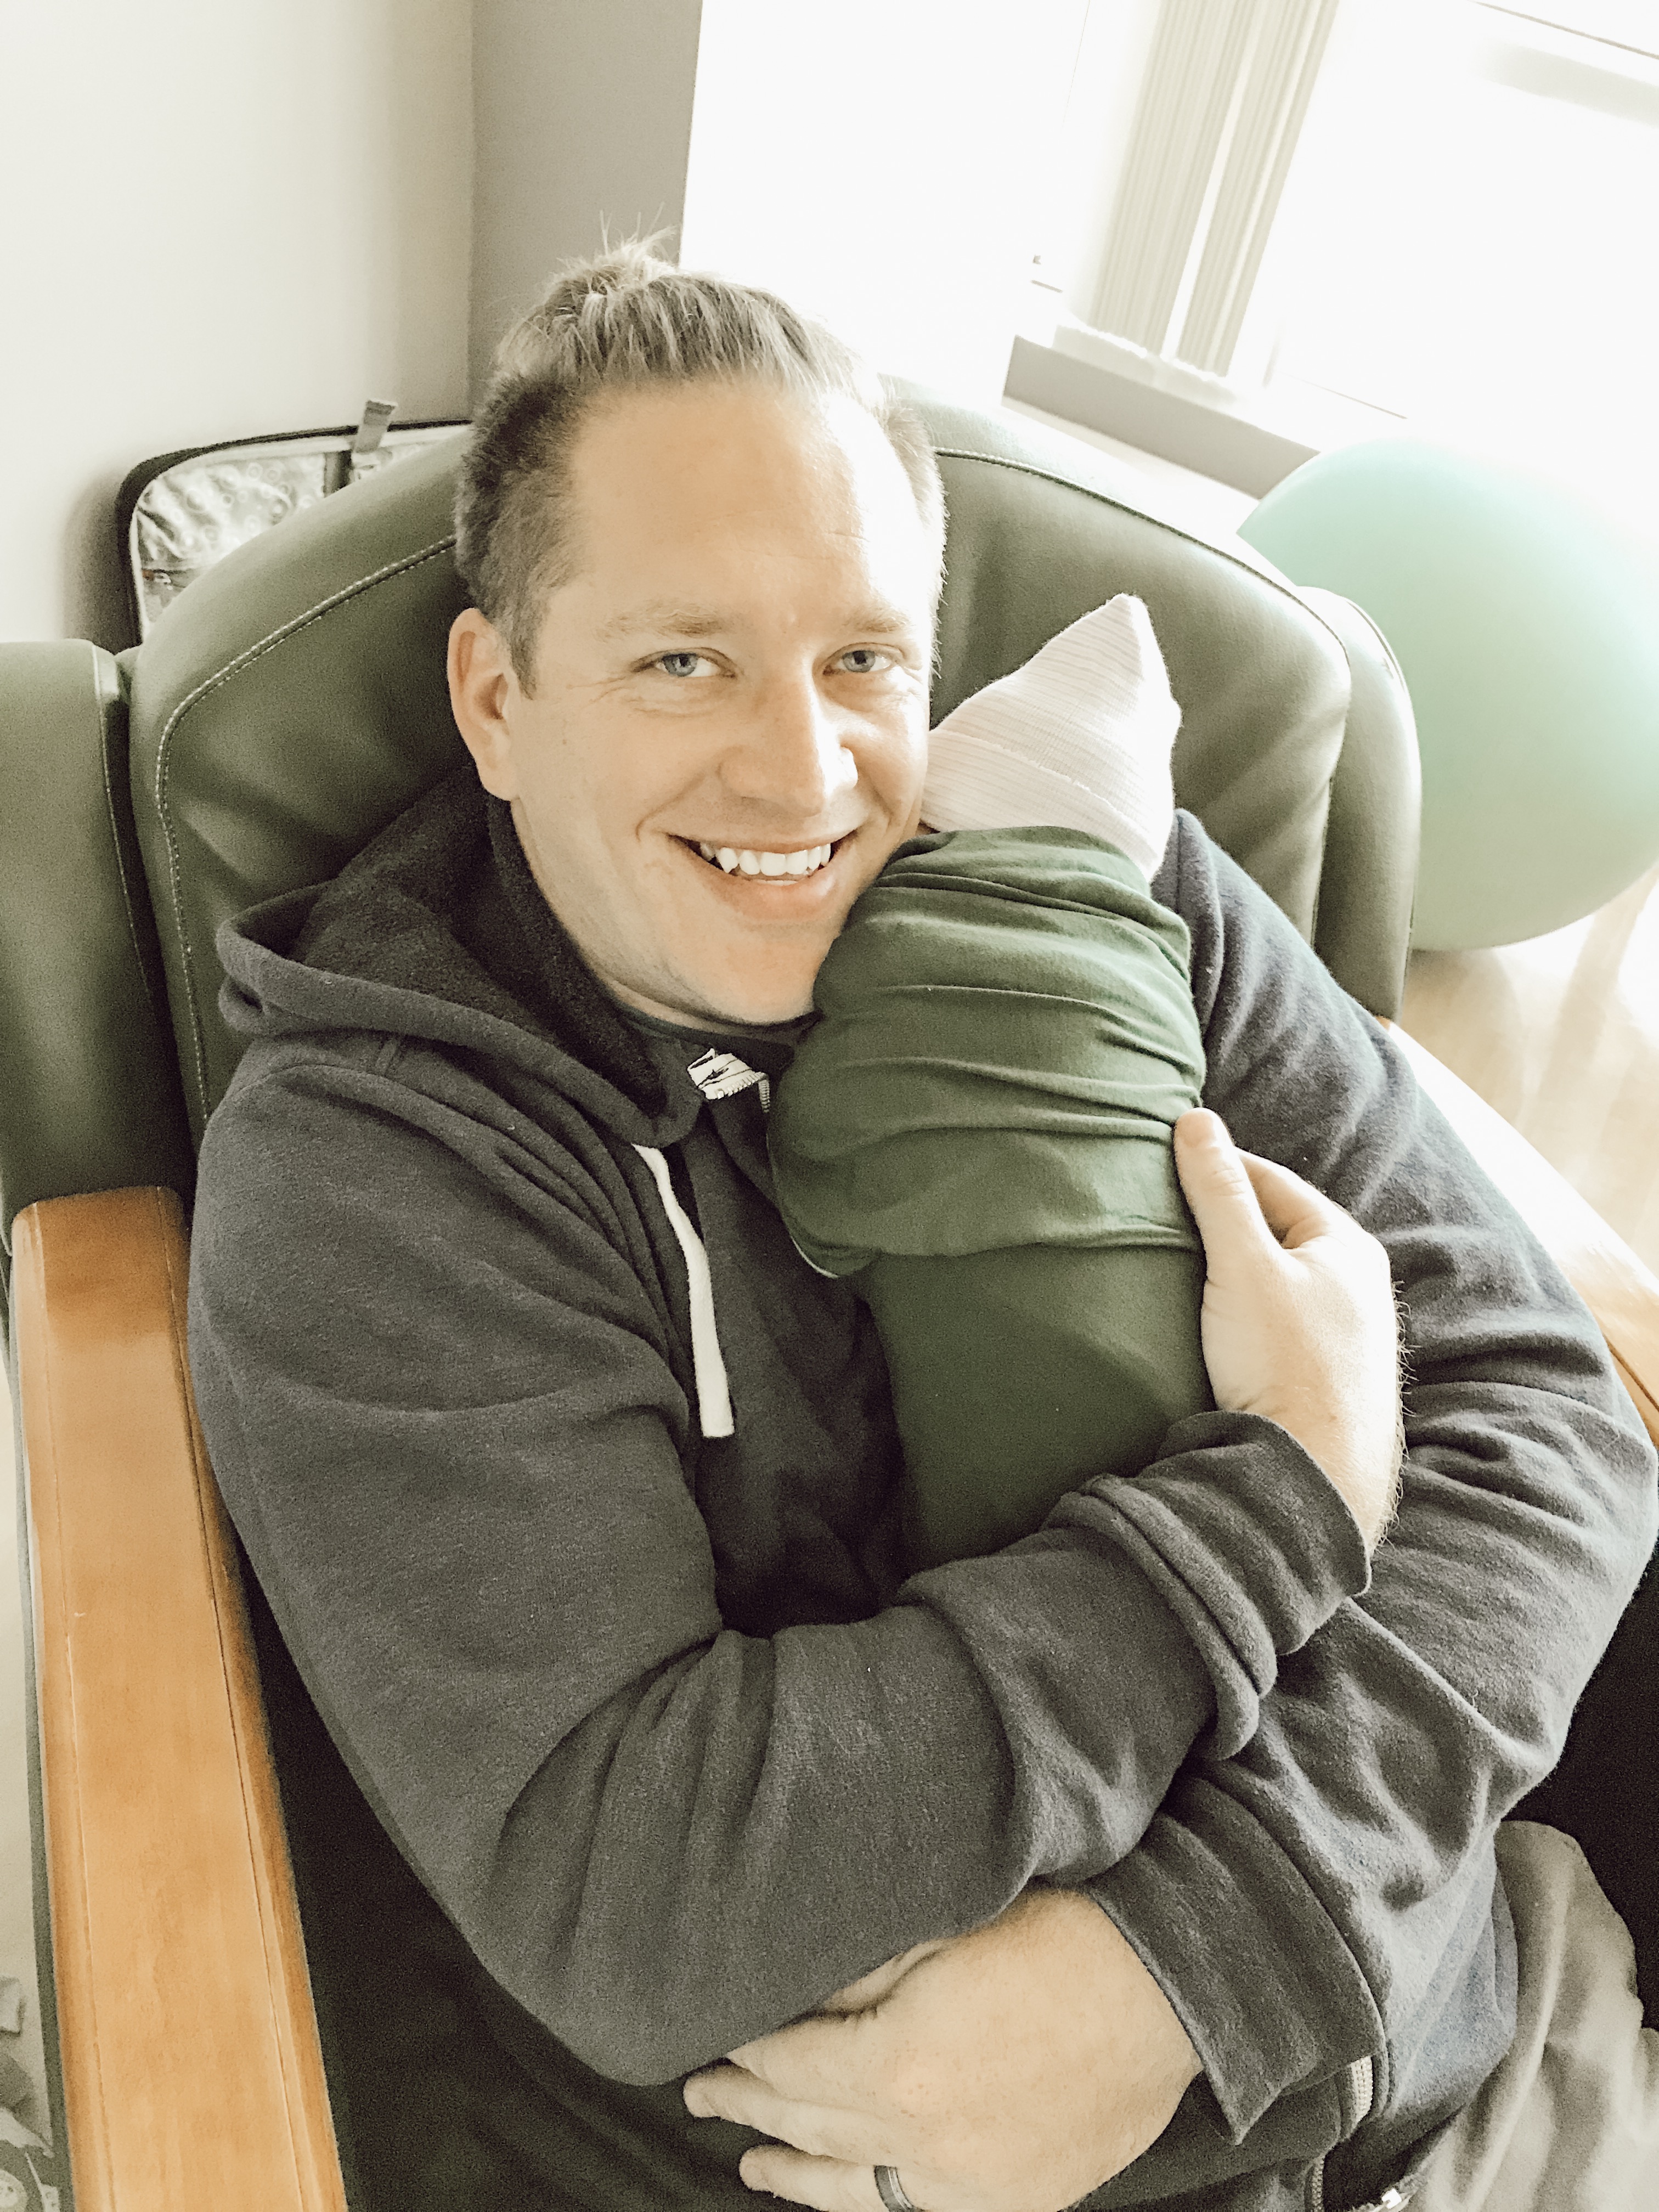 New dad with newborn baby wrapped in kickee pants blanket